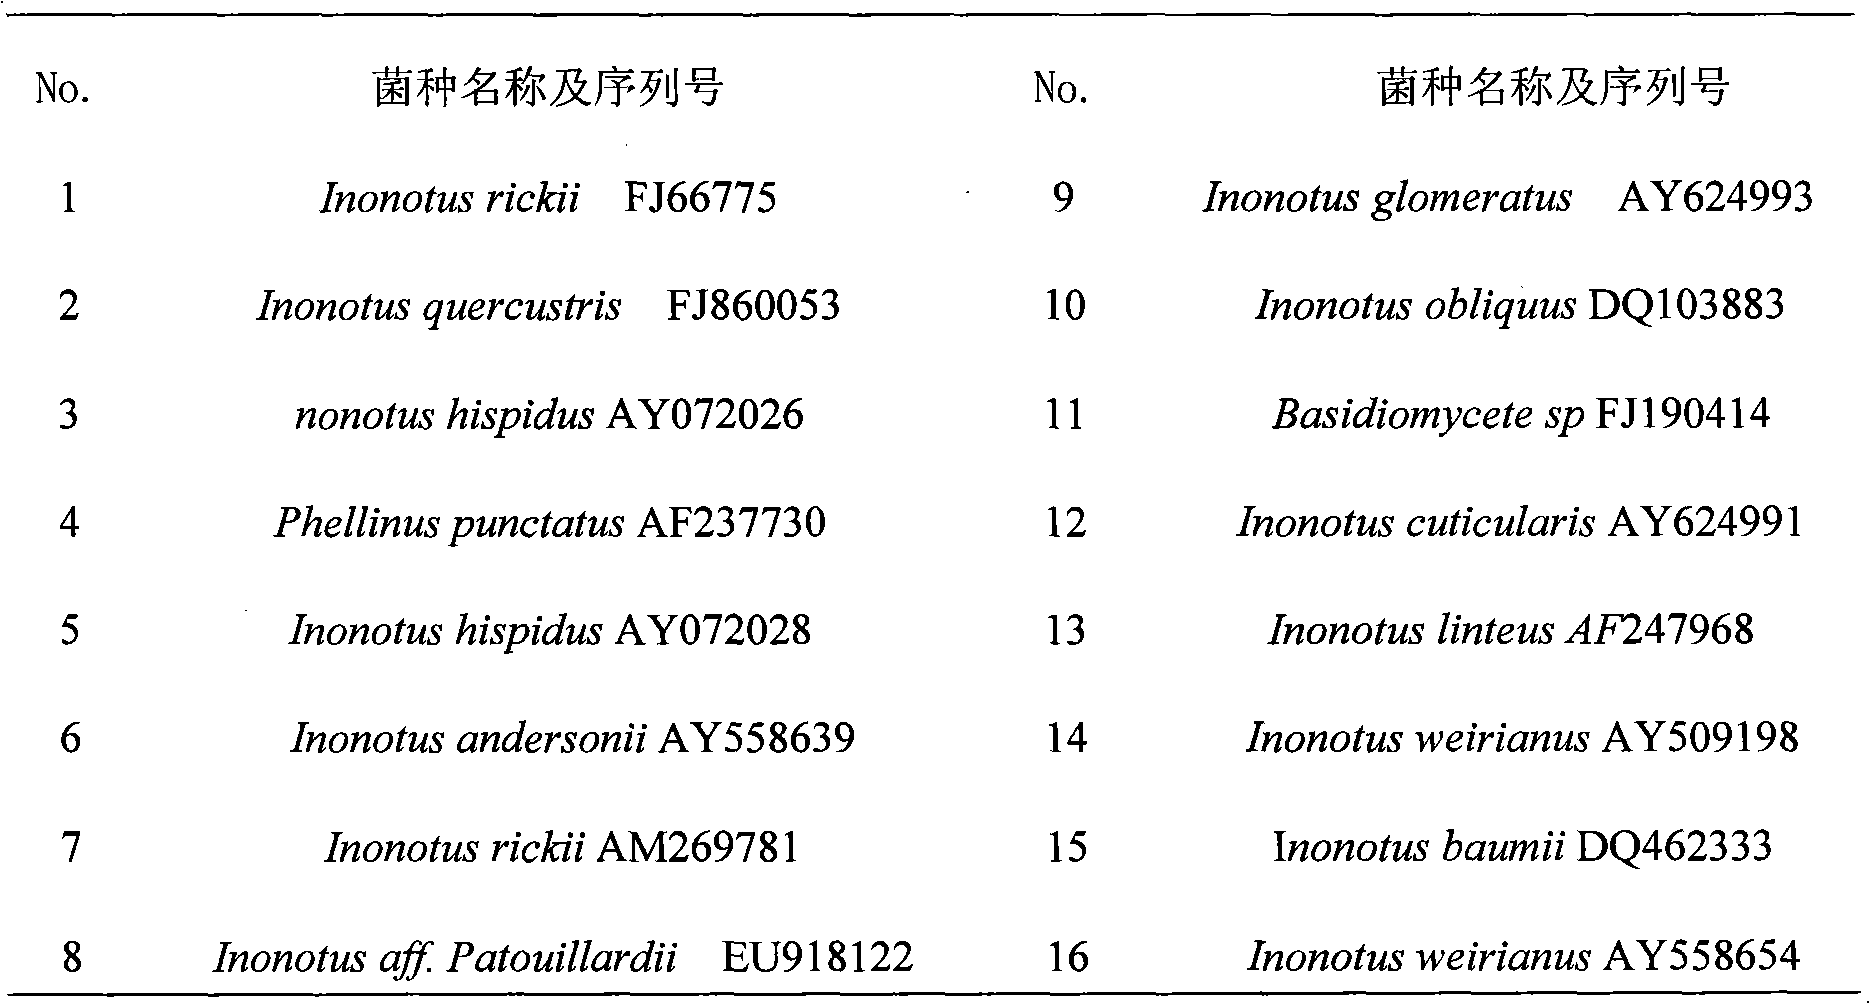 Inonotus obliquus and method for extracting triterpennoids from same